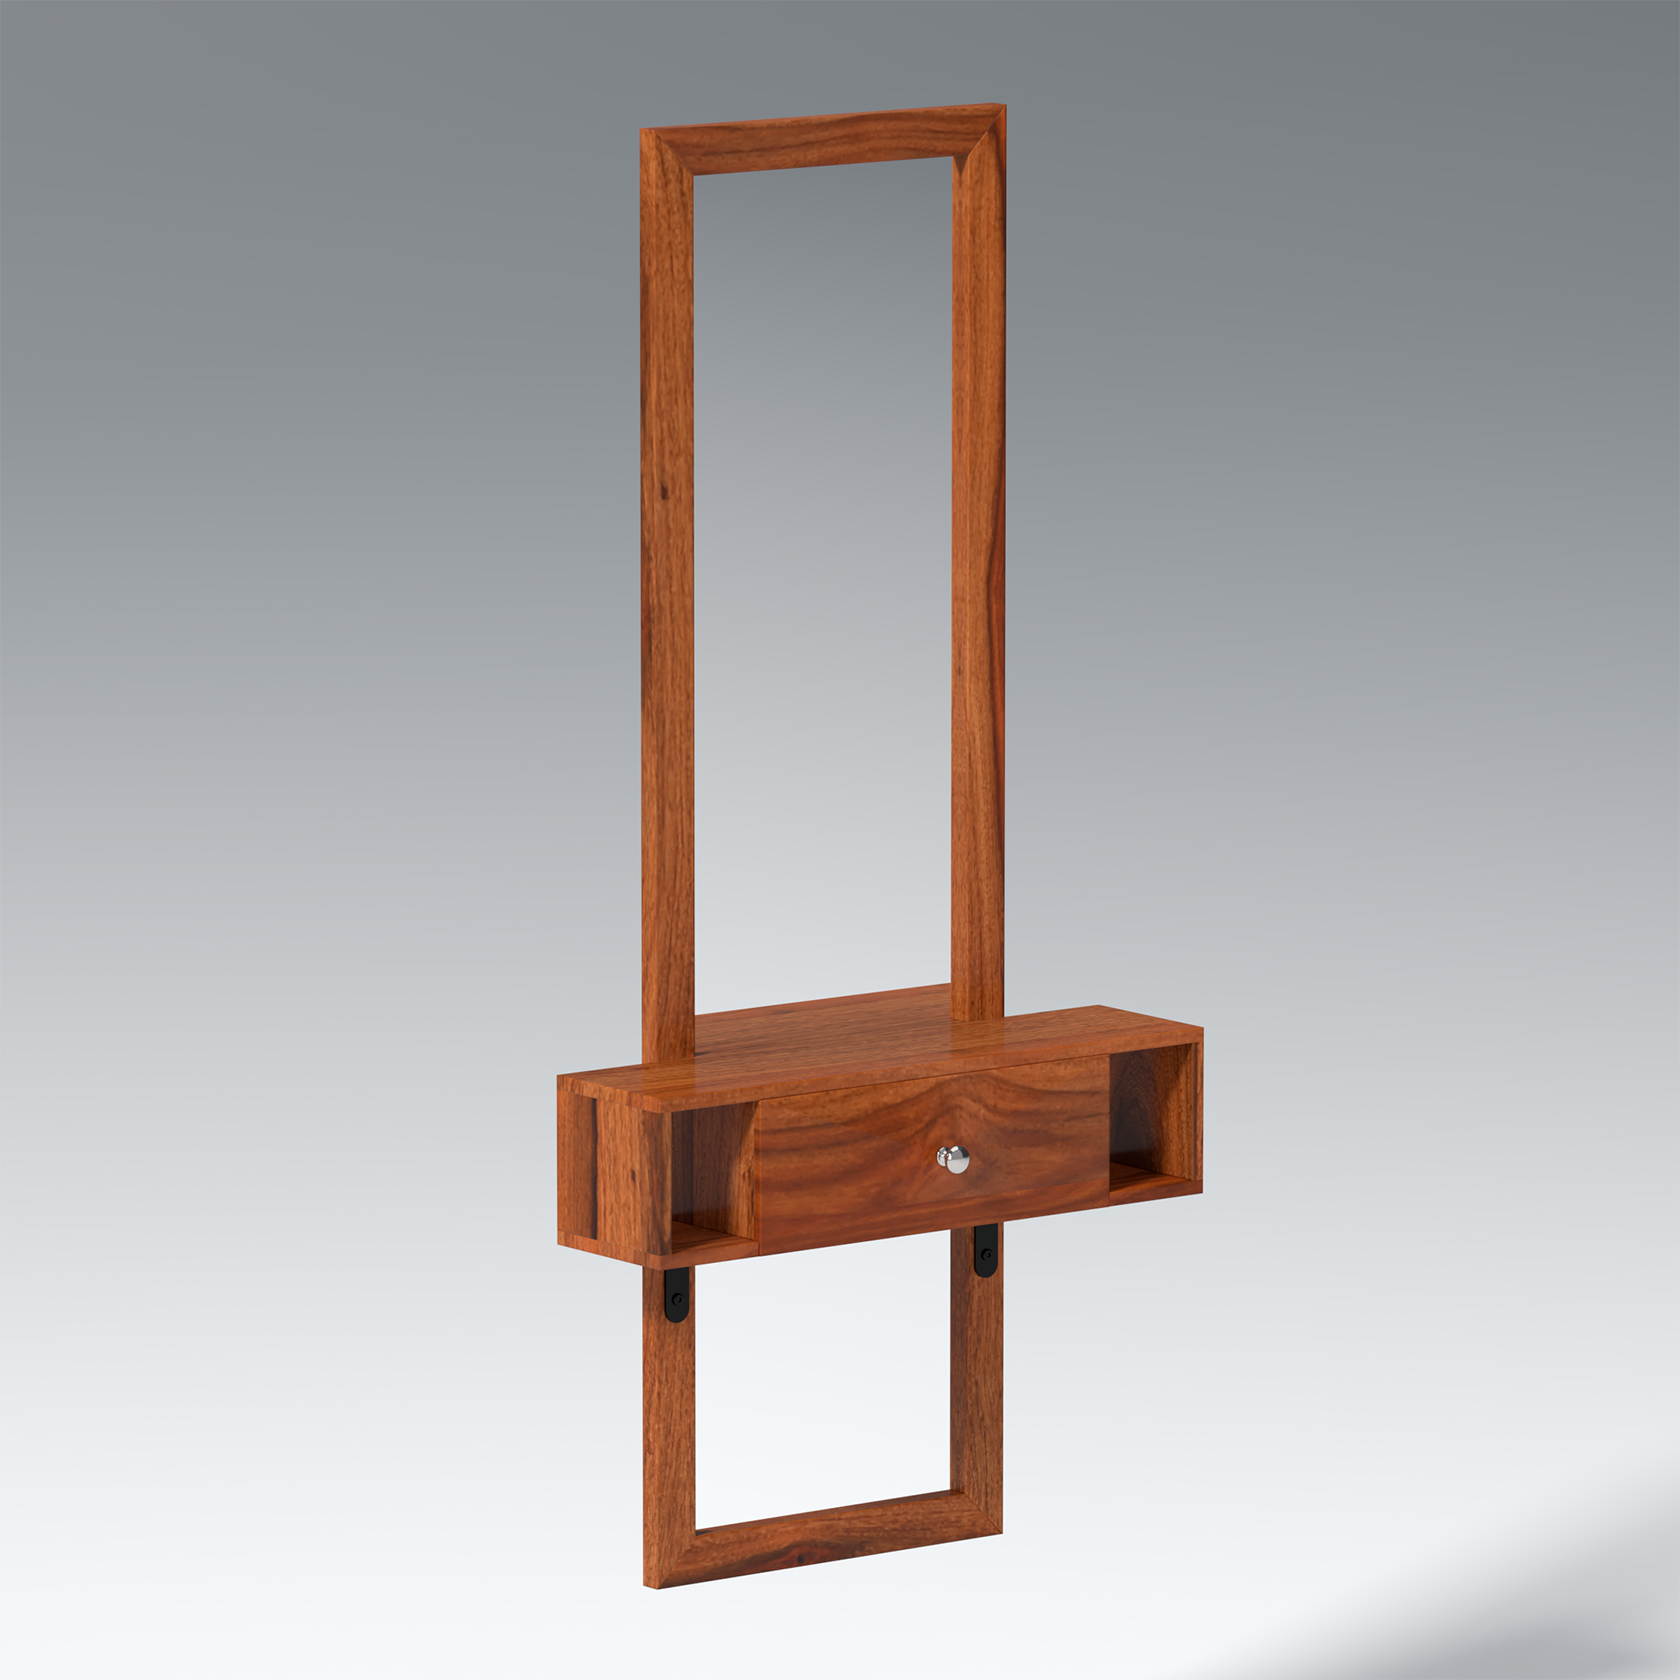 Glimm Sheesham Wood Wall Mount Dressing Table in Reddish Rosewood color